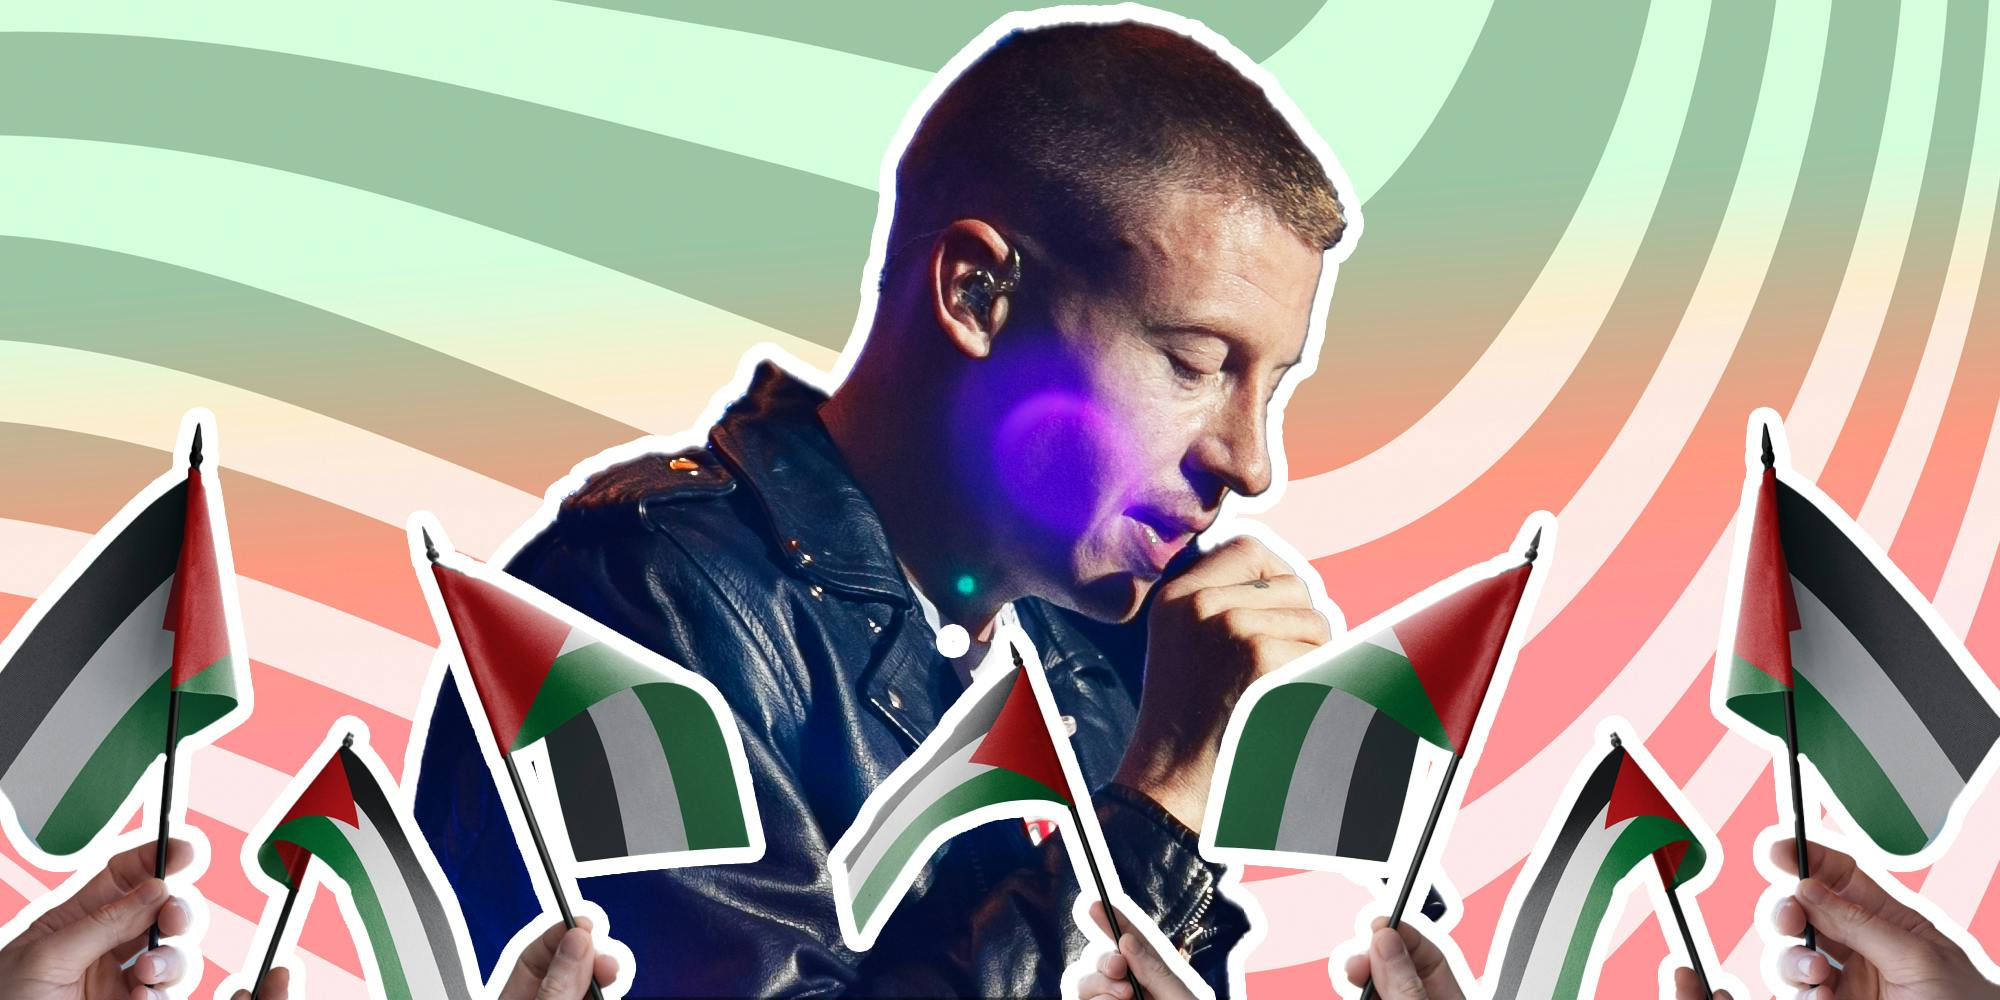 ‘The blood is on your hands, Biden’: Macklemore’s pro-Palestine protest song ‘Hind’s Hall’ is stirring reactions online